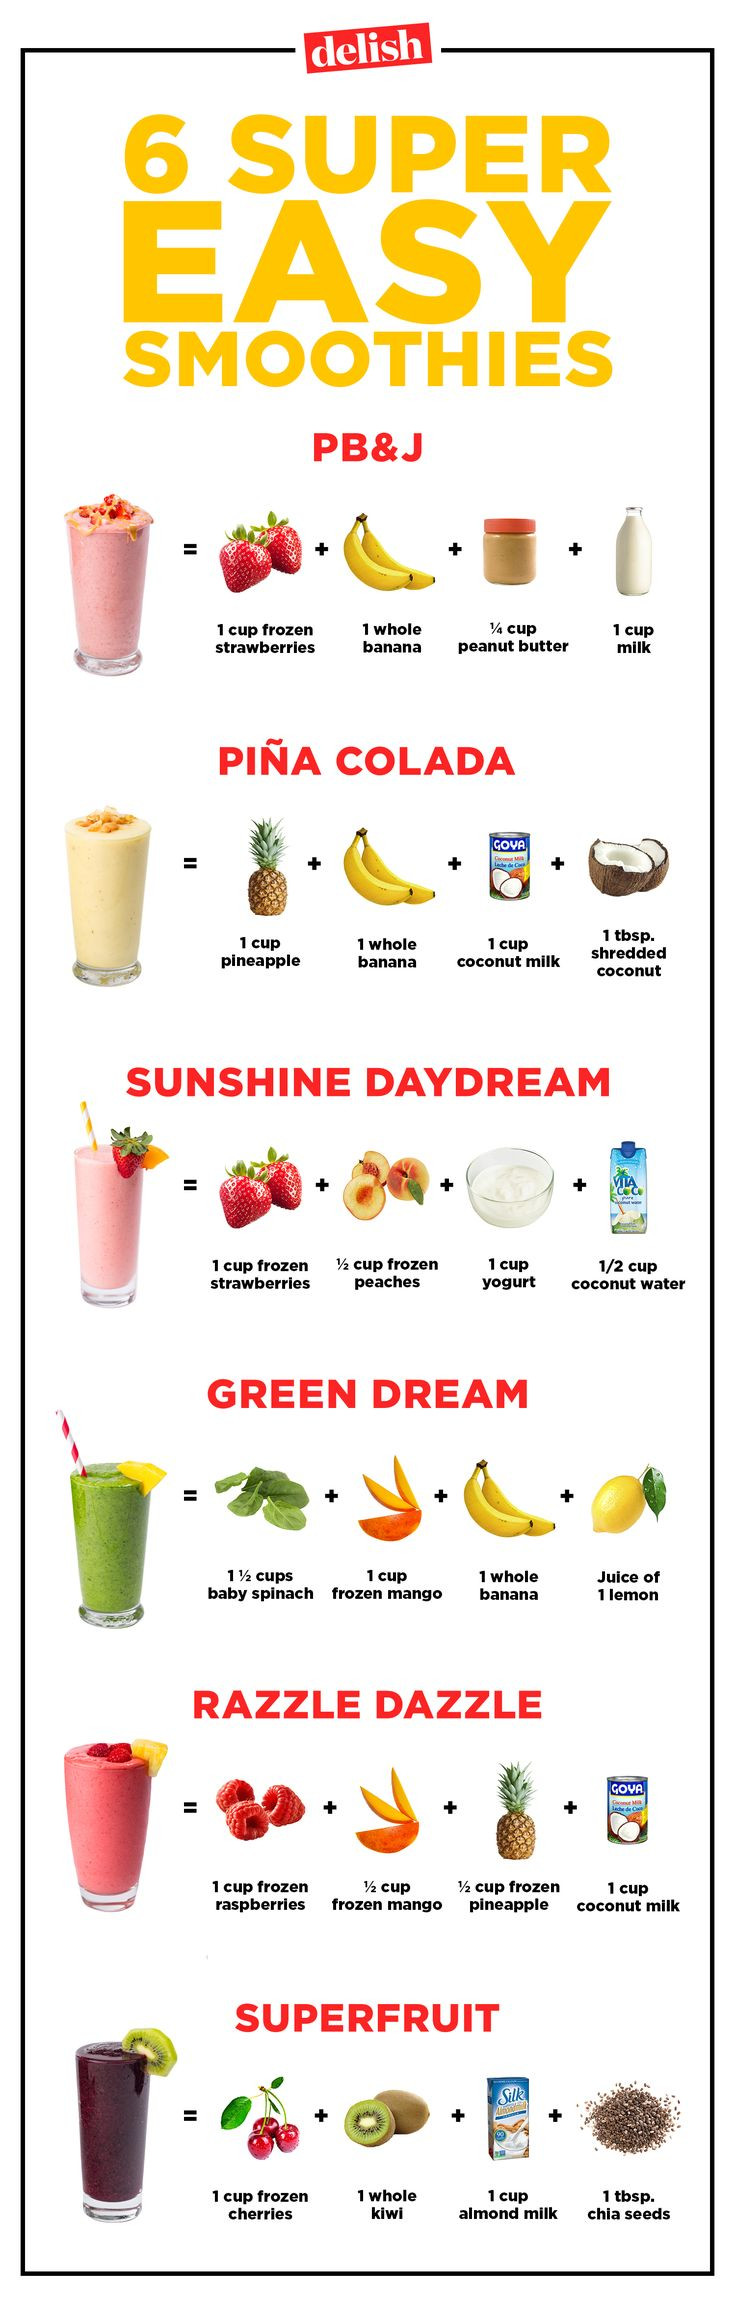 Simple Healthy Smoothie Recipes
 13 best images about Organization & Study Motivation on